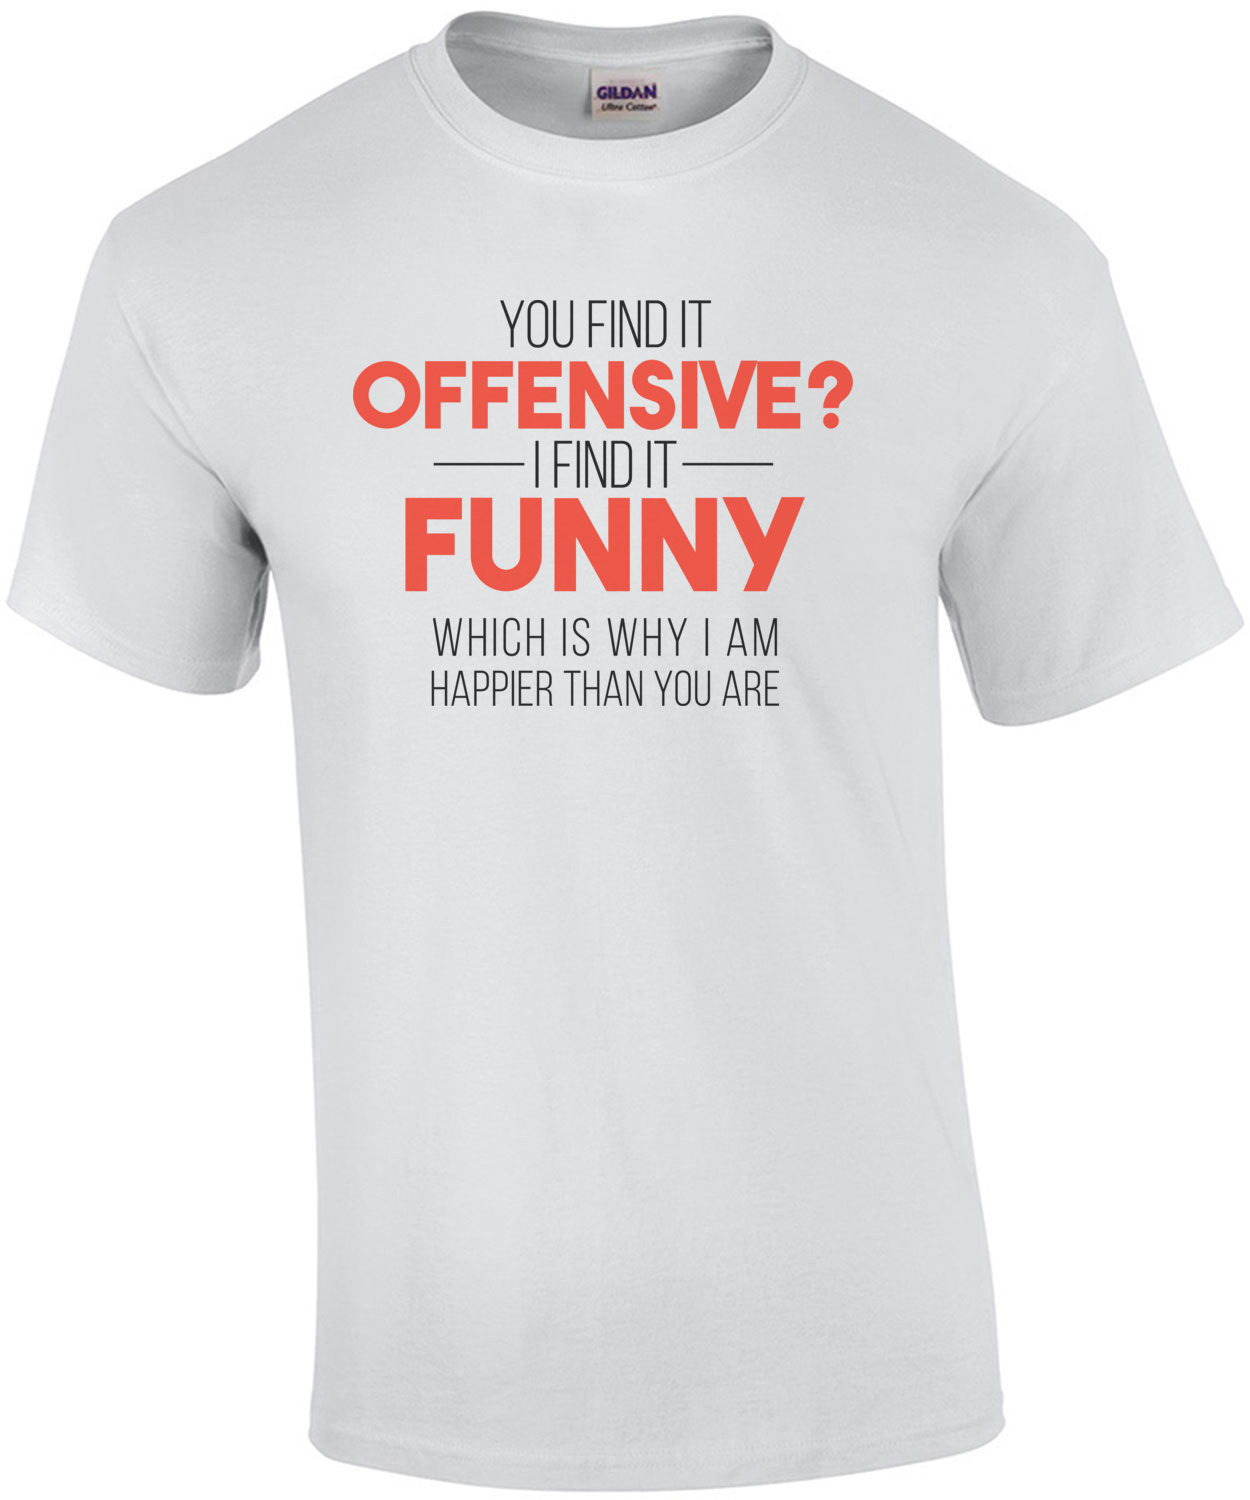   YOU FIND IT OFFENSIVE? I FIND IT FUNNY. THAT'S WHY I'M HAPPIER THAN YOU.